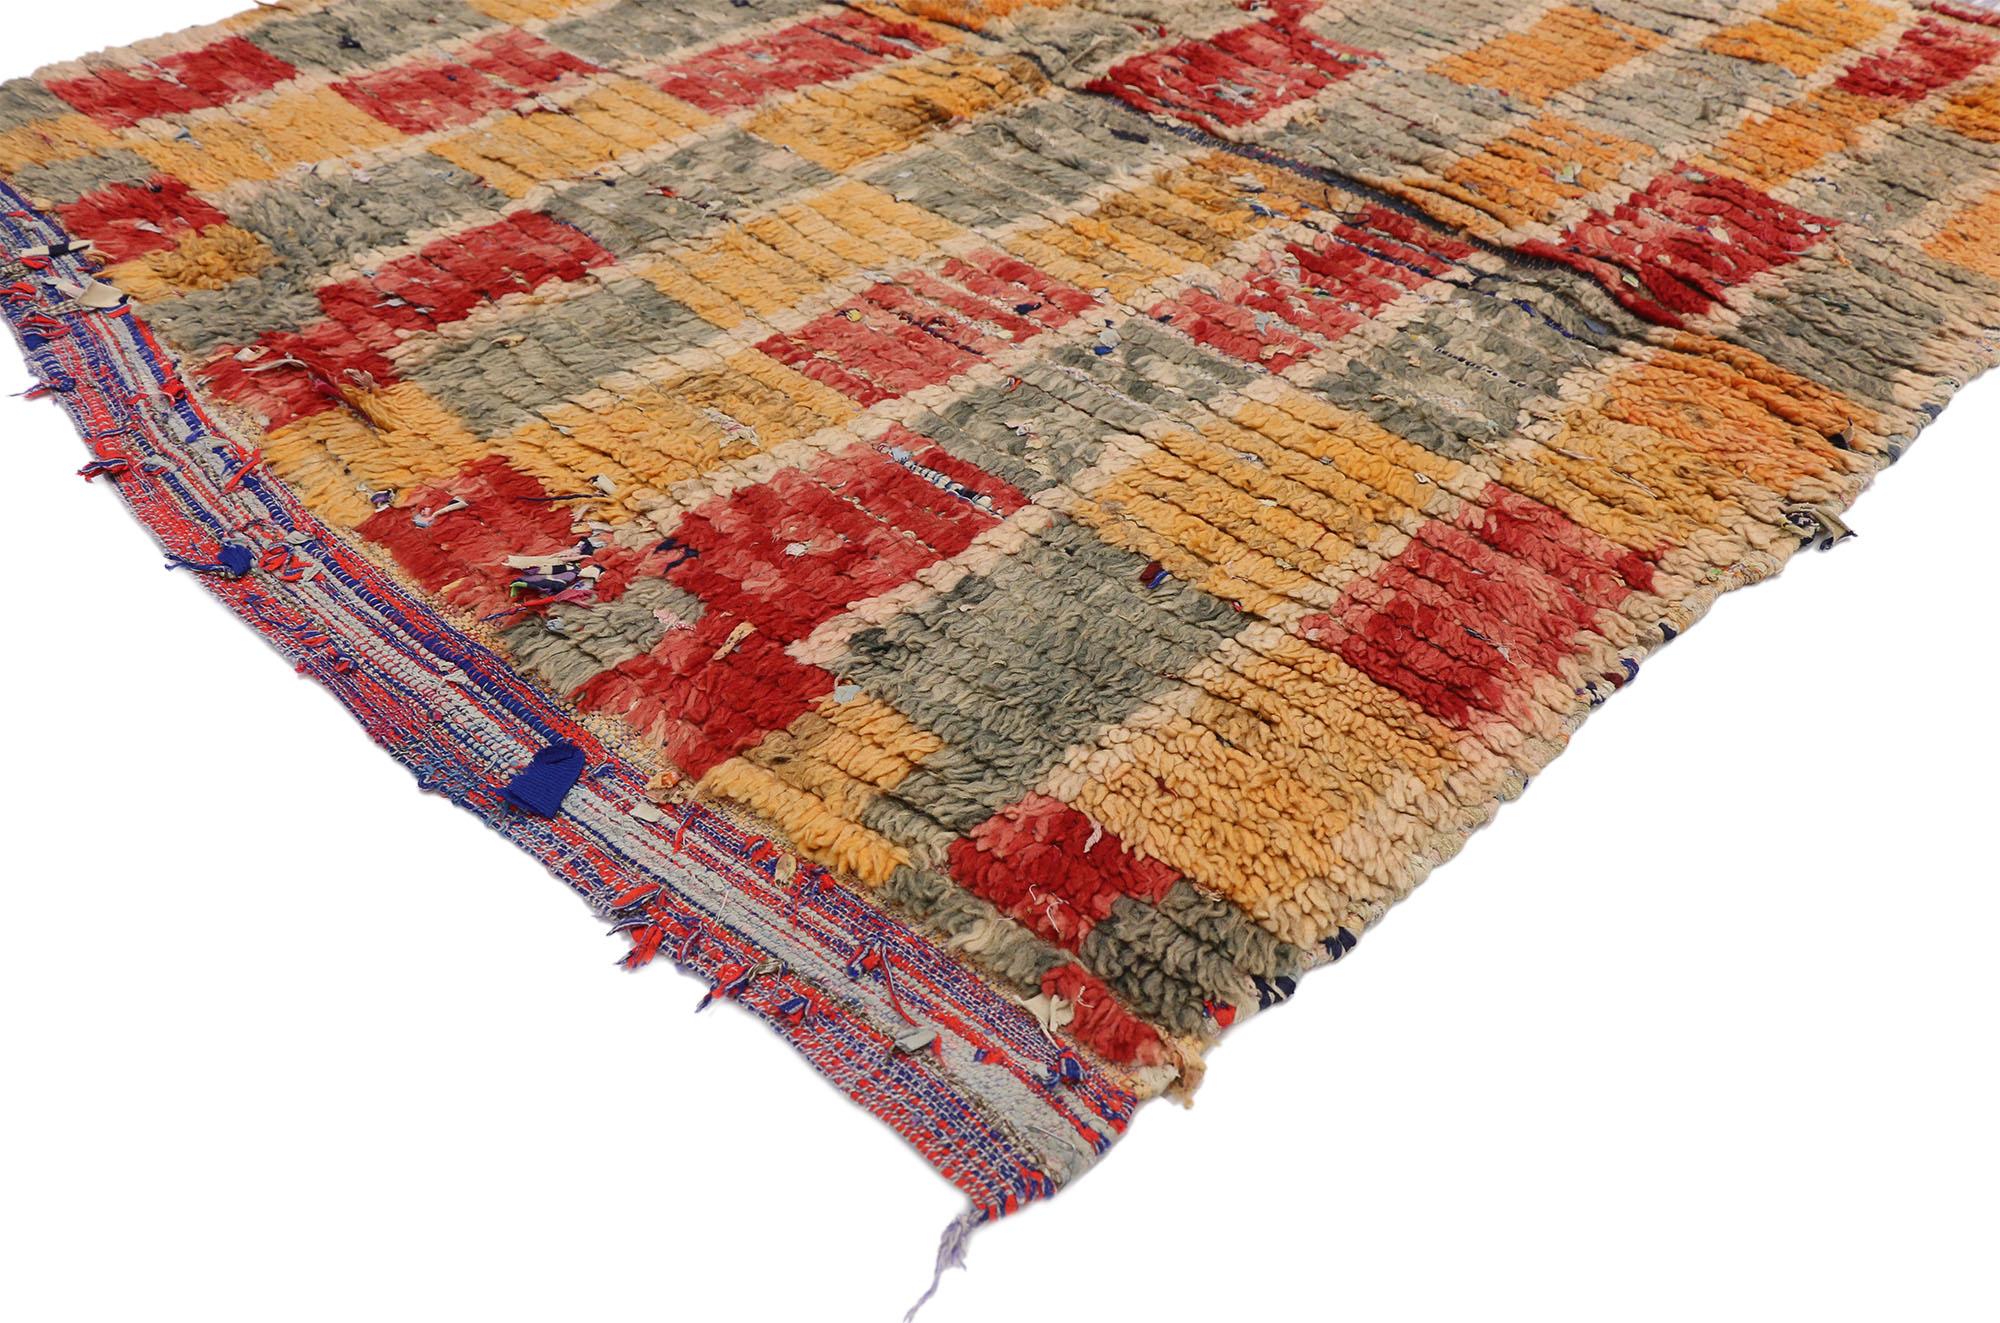 20884, vintage Moroccan Boucherouite rug with Postmodern Bauhaus Cubism style. This hand knotted wool and cotton vintage Berber Moroccan Boucherouite rug with Cubism style features a checkerboard pattern. The geometric design is layered with